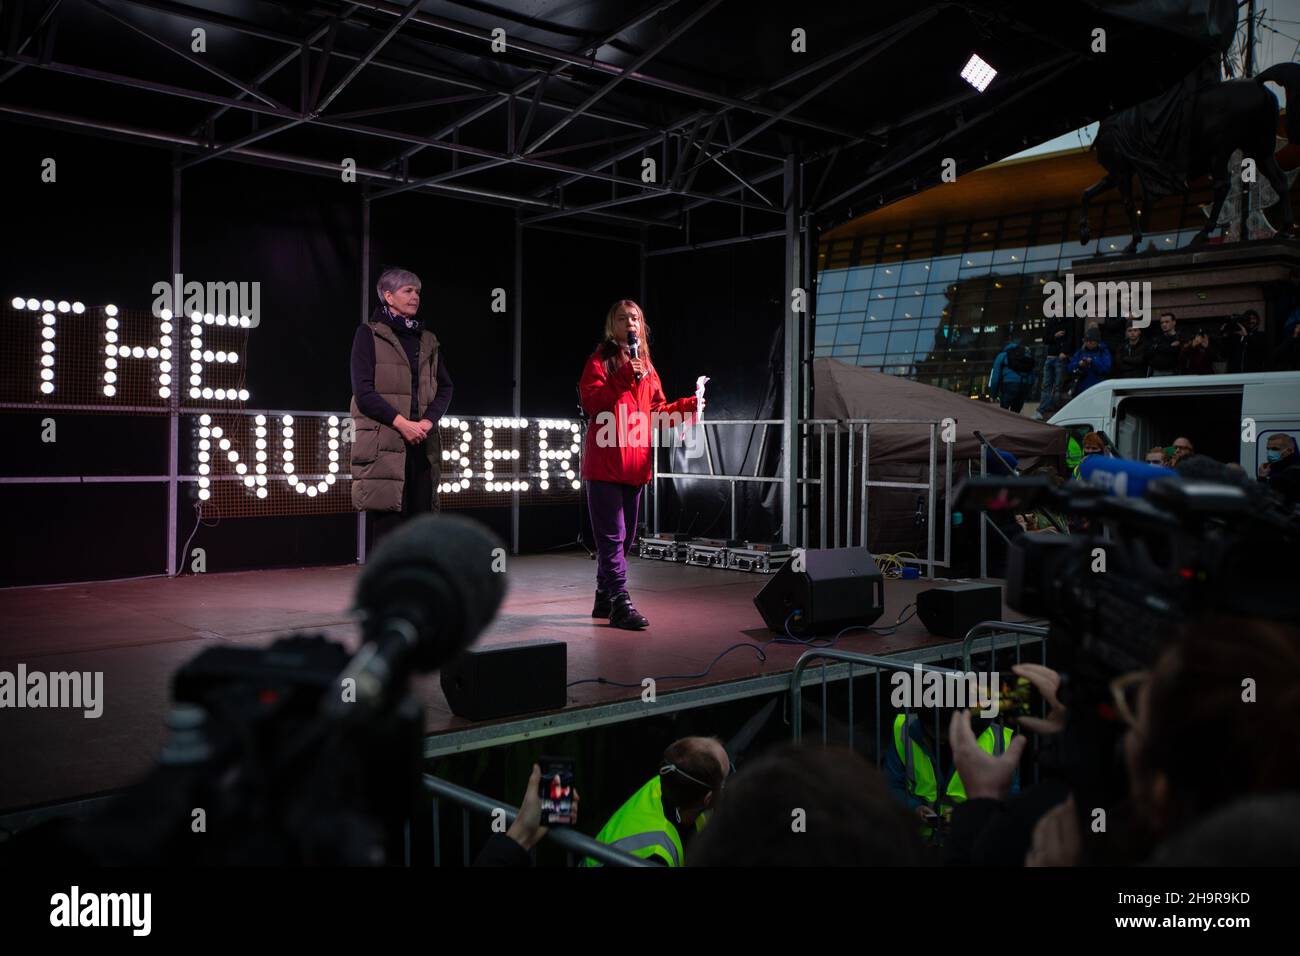 Swedish climate activist Greta Thunberg, Fridays For Future school climate strike, coinciding with the 26th UN Climate Change Conference, known as COP26, currently being held in Glasgow, Scotland, on 5 November 2021. Stock Photo